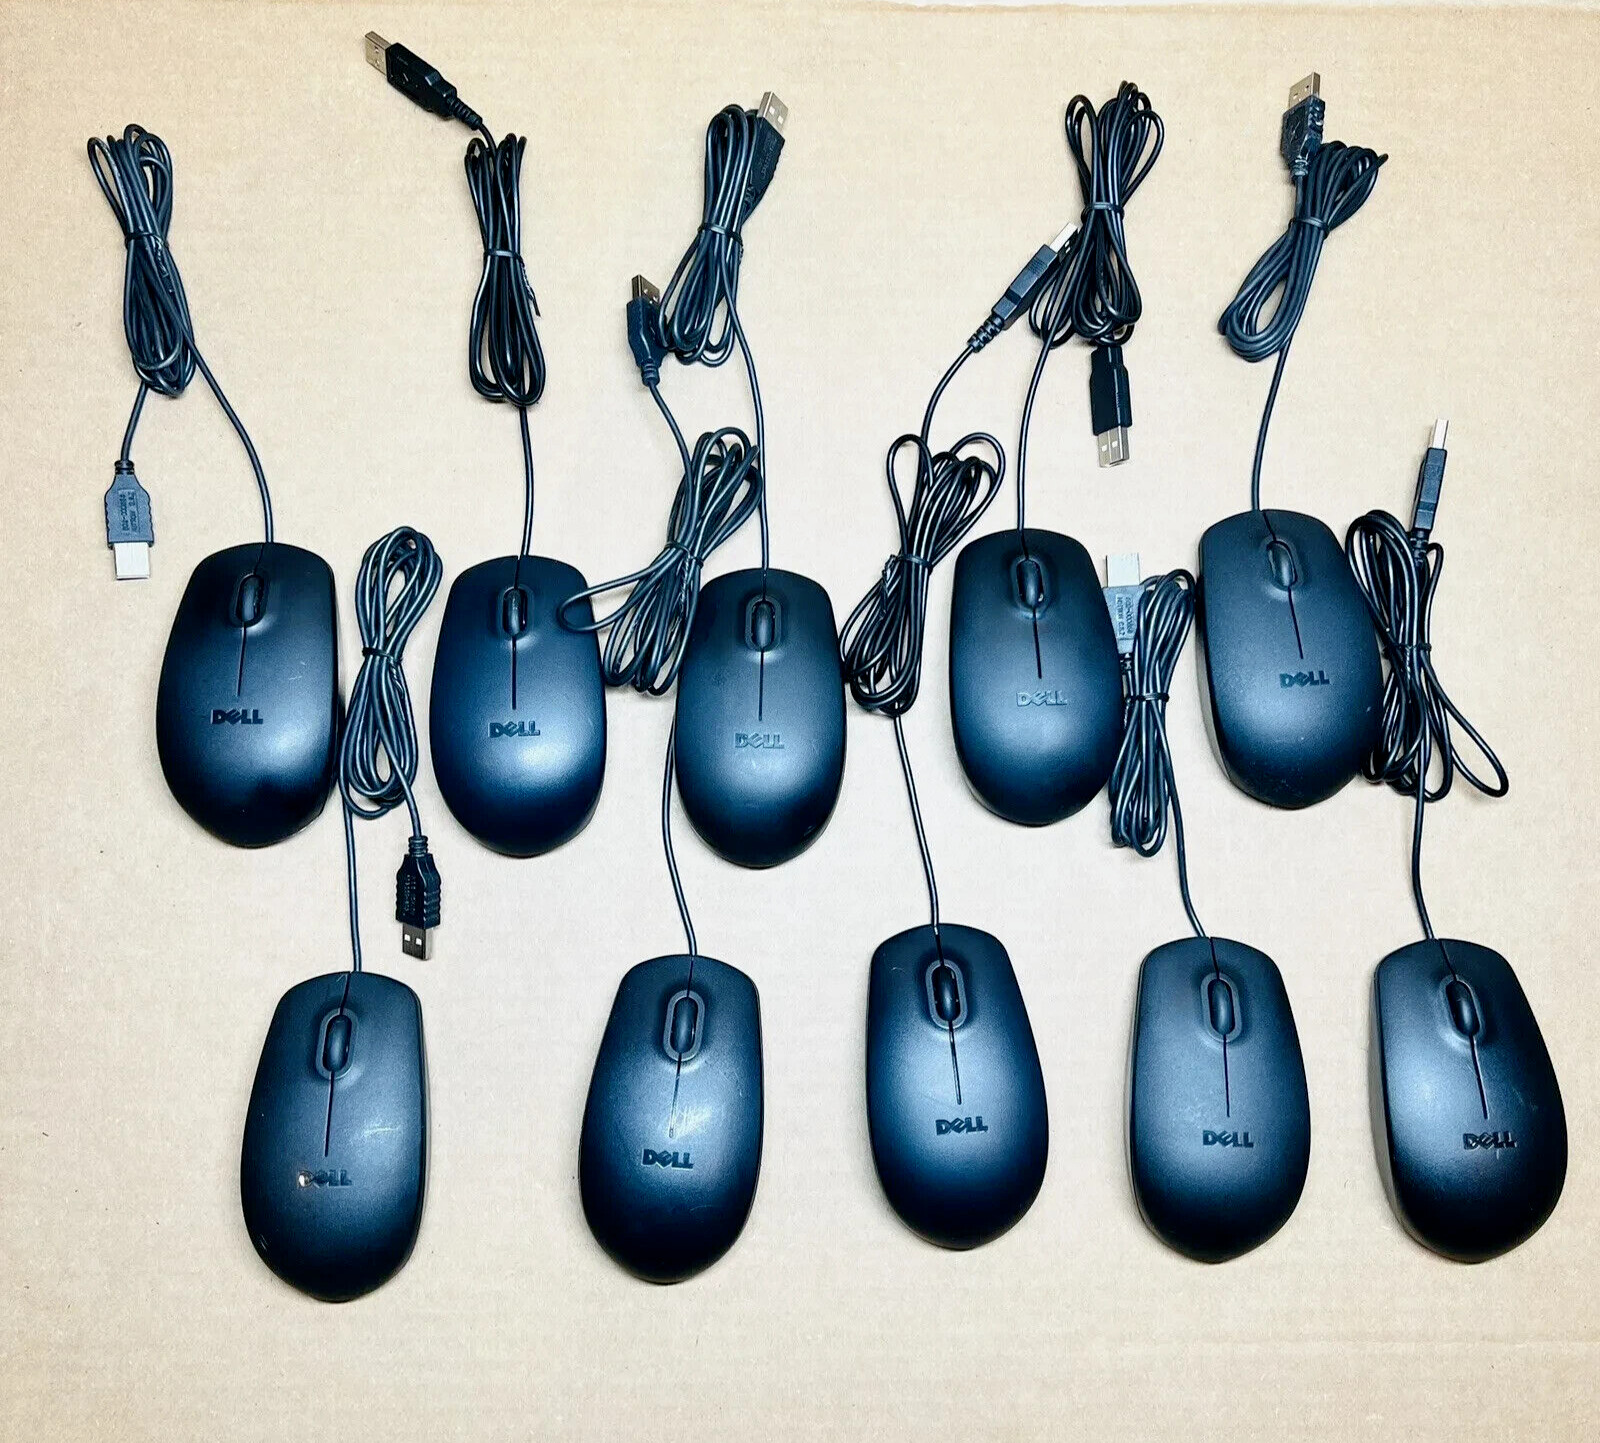 Lot of 10 Dell MS111 -L Black Scroll Wired Mouse USB 11D3V 5Y2RG 356WK 9RRC7